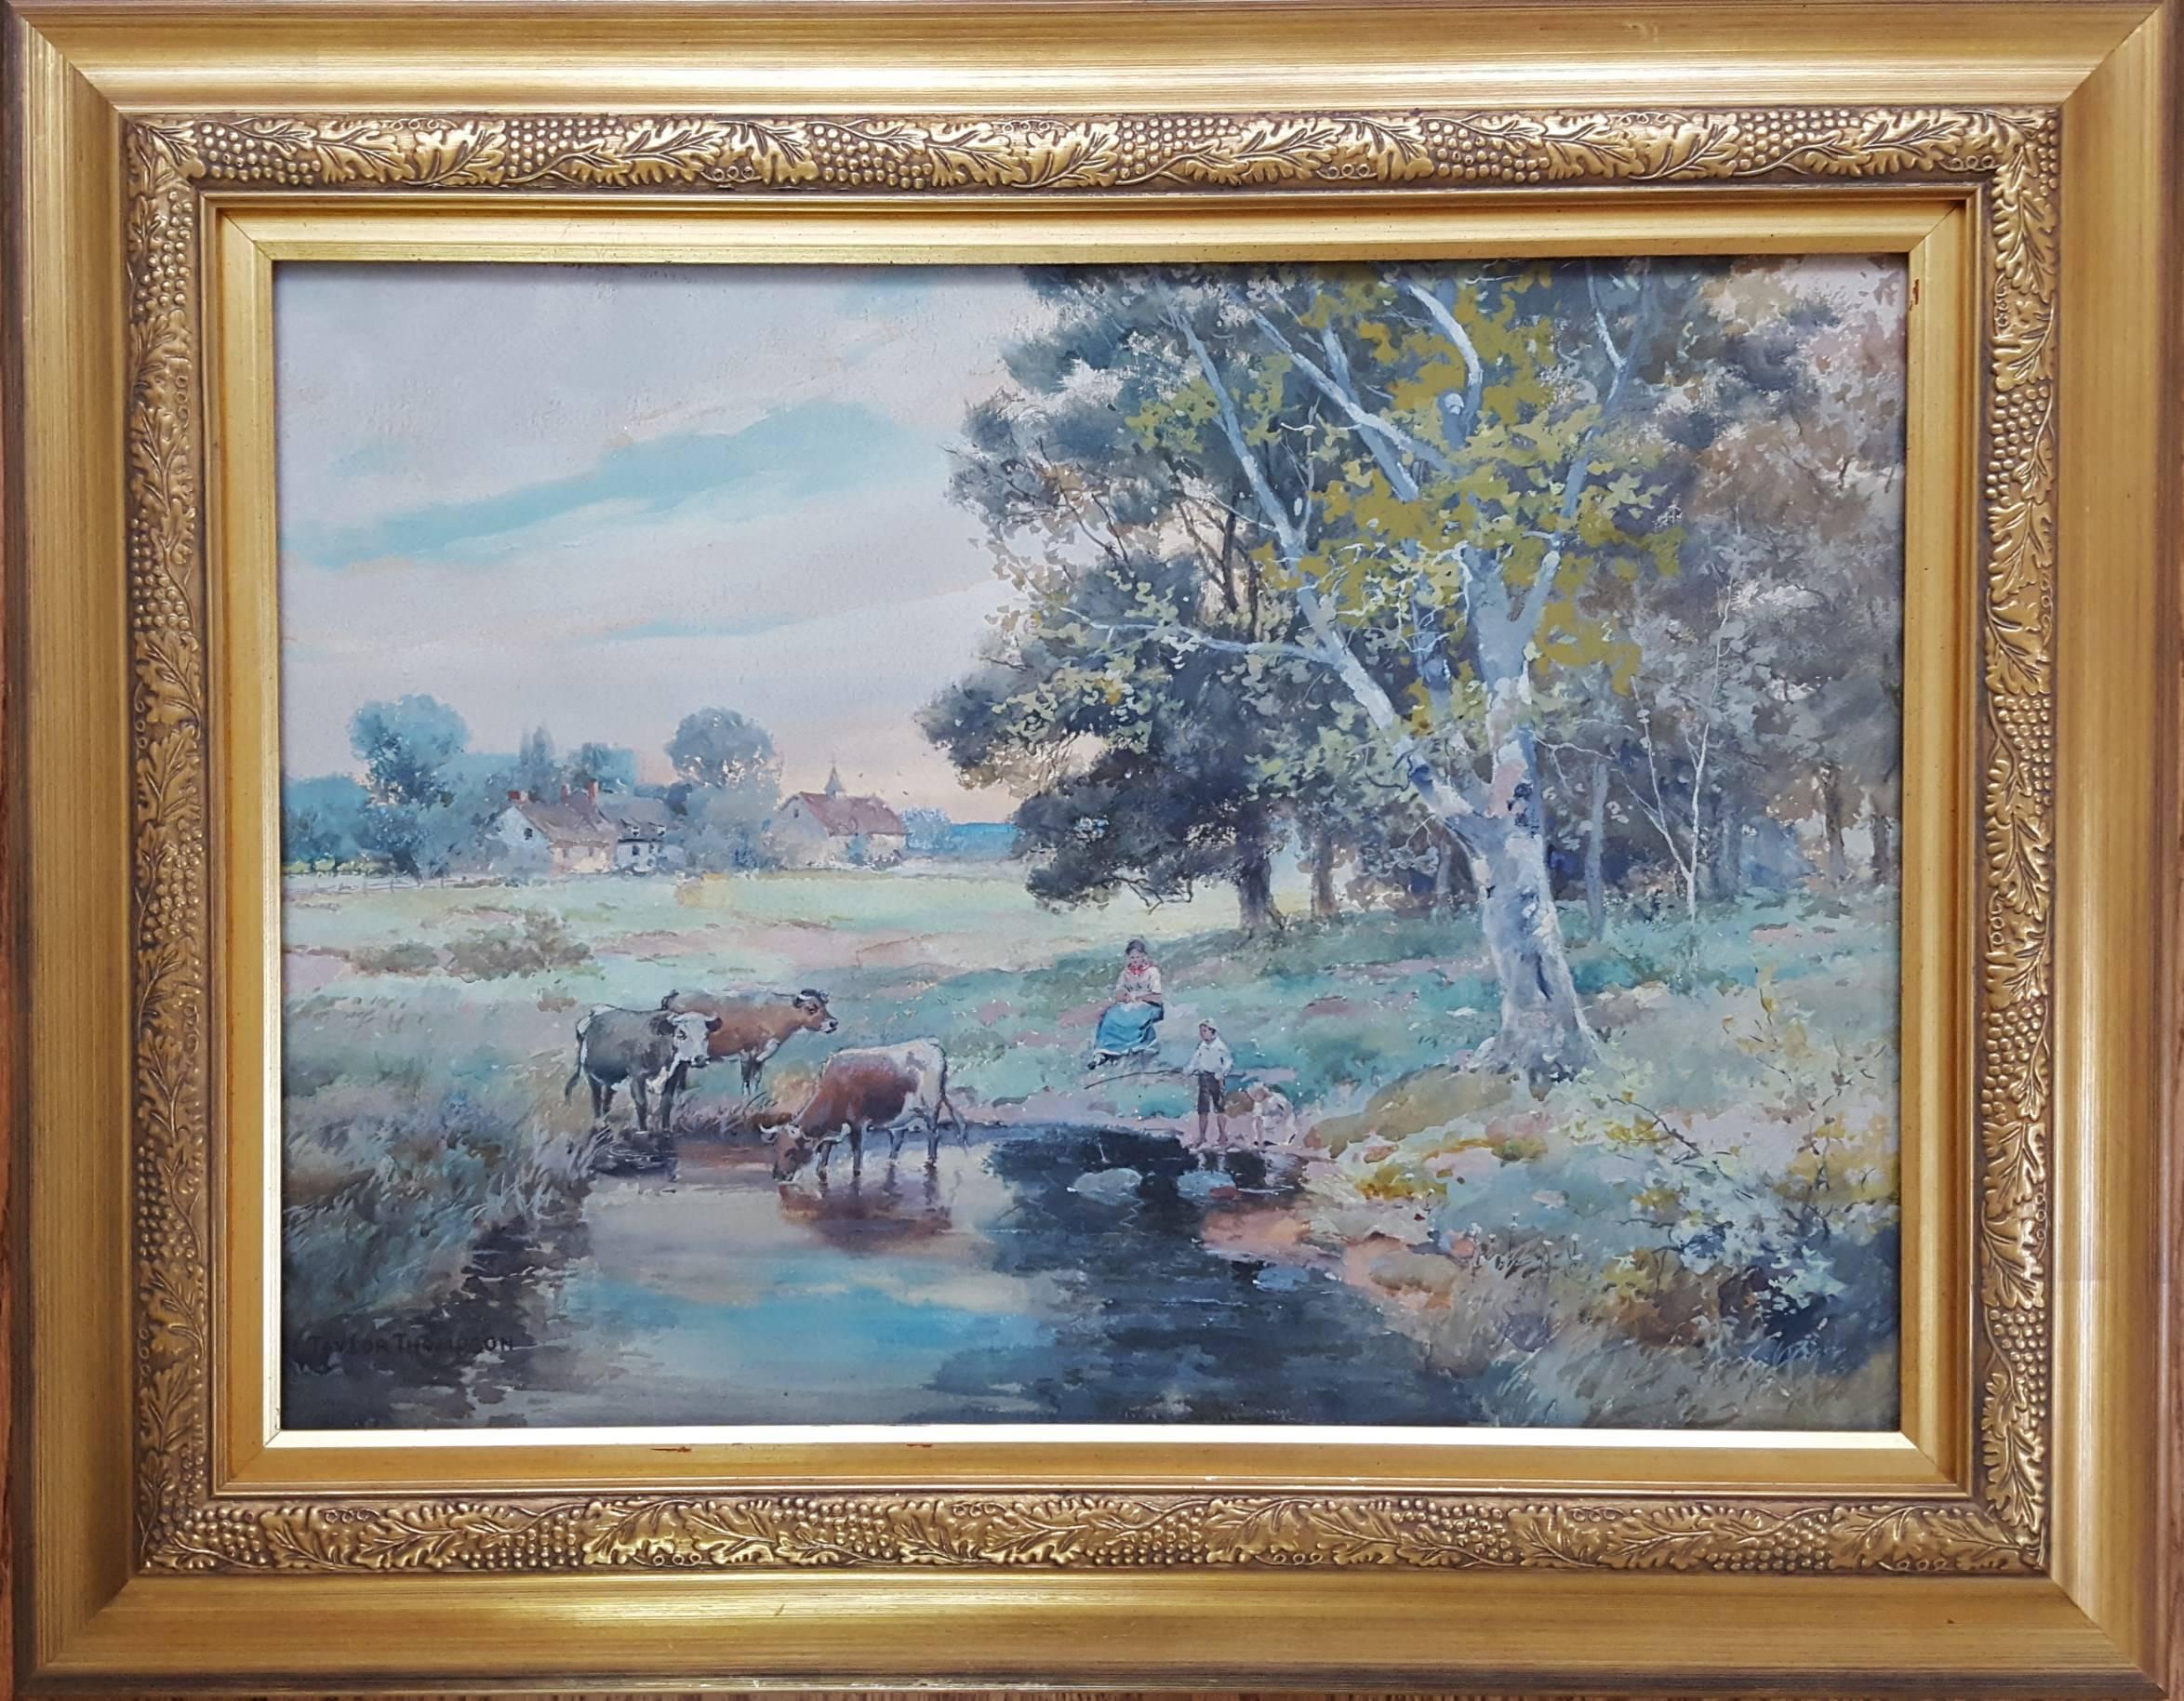 Children with Cows on English Farm Landscape - Painting by Taylor Thompson